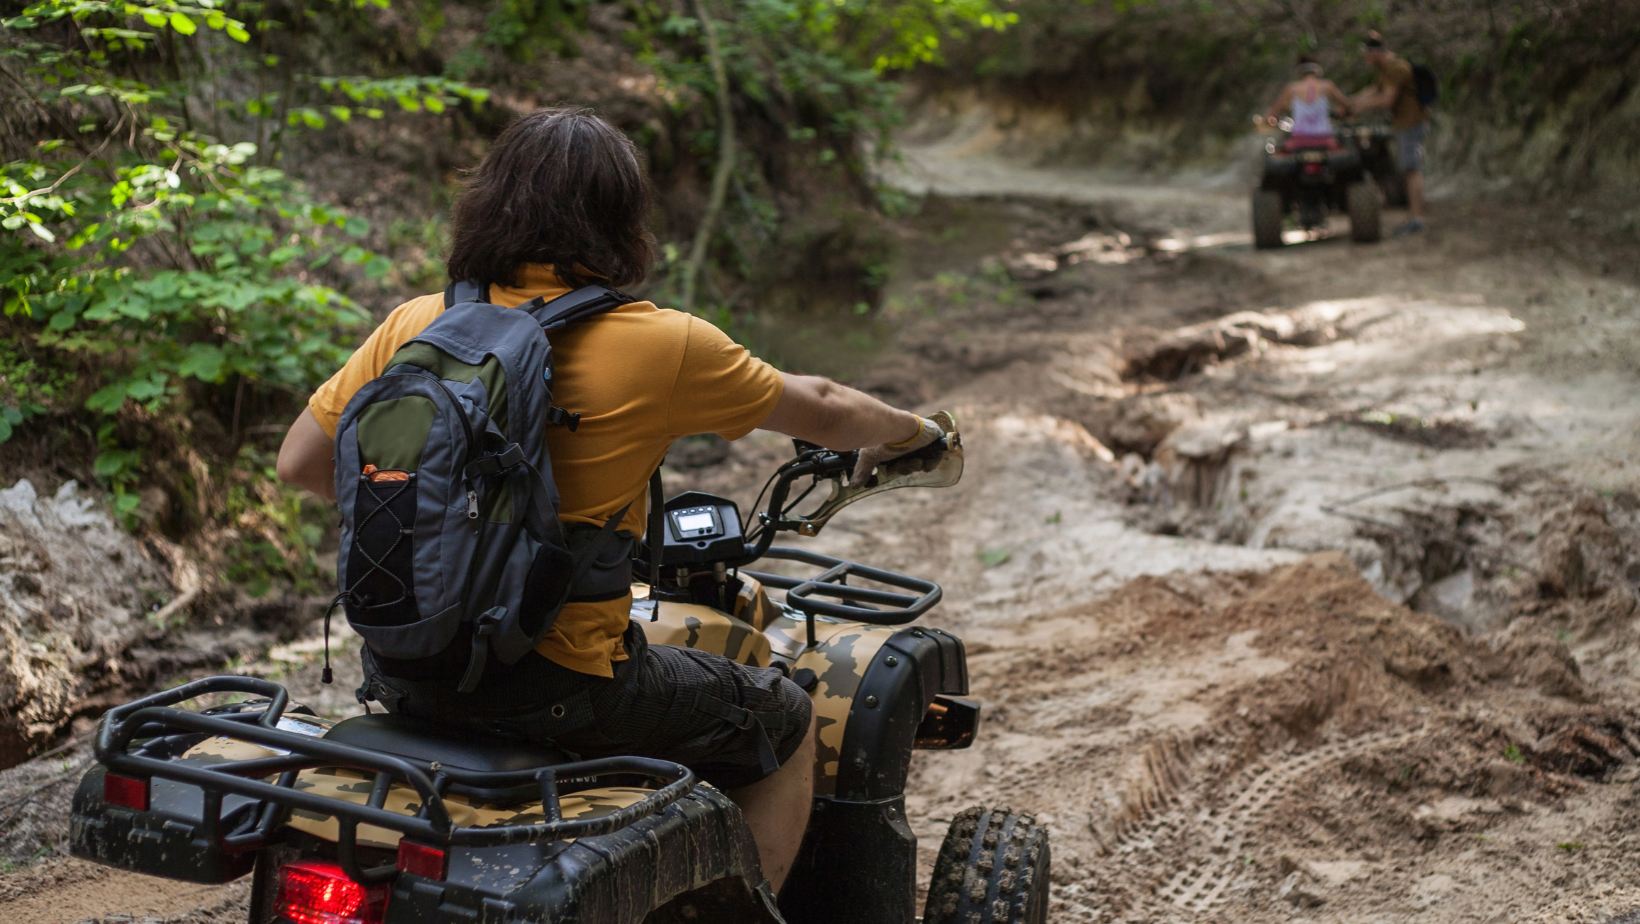 ATV Rental Business Insurance Coverage and Providers